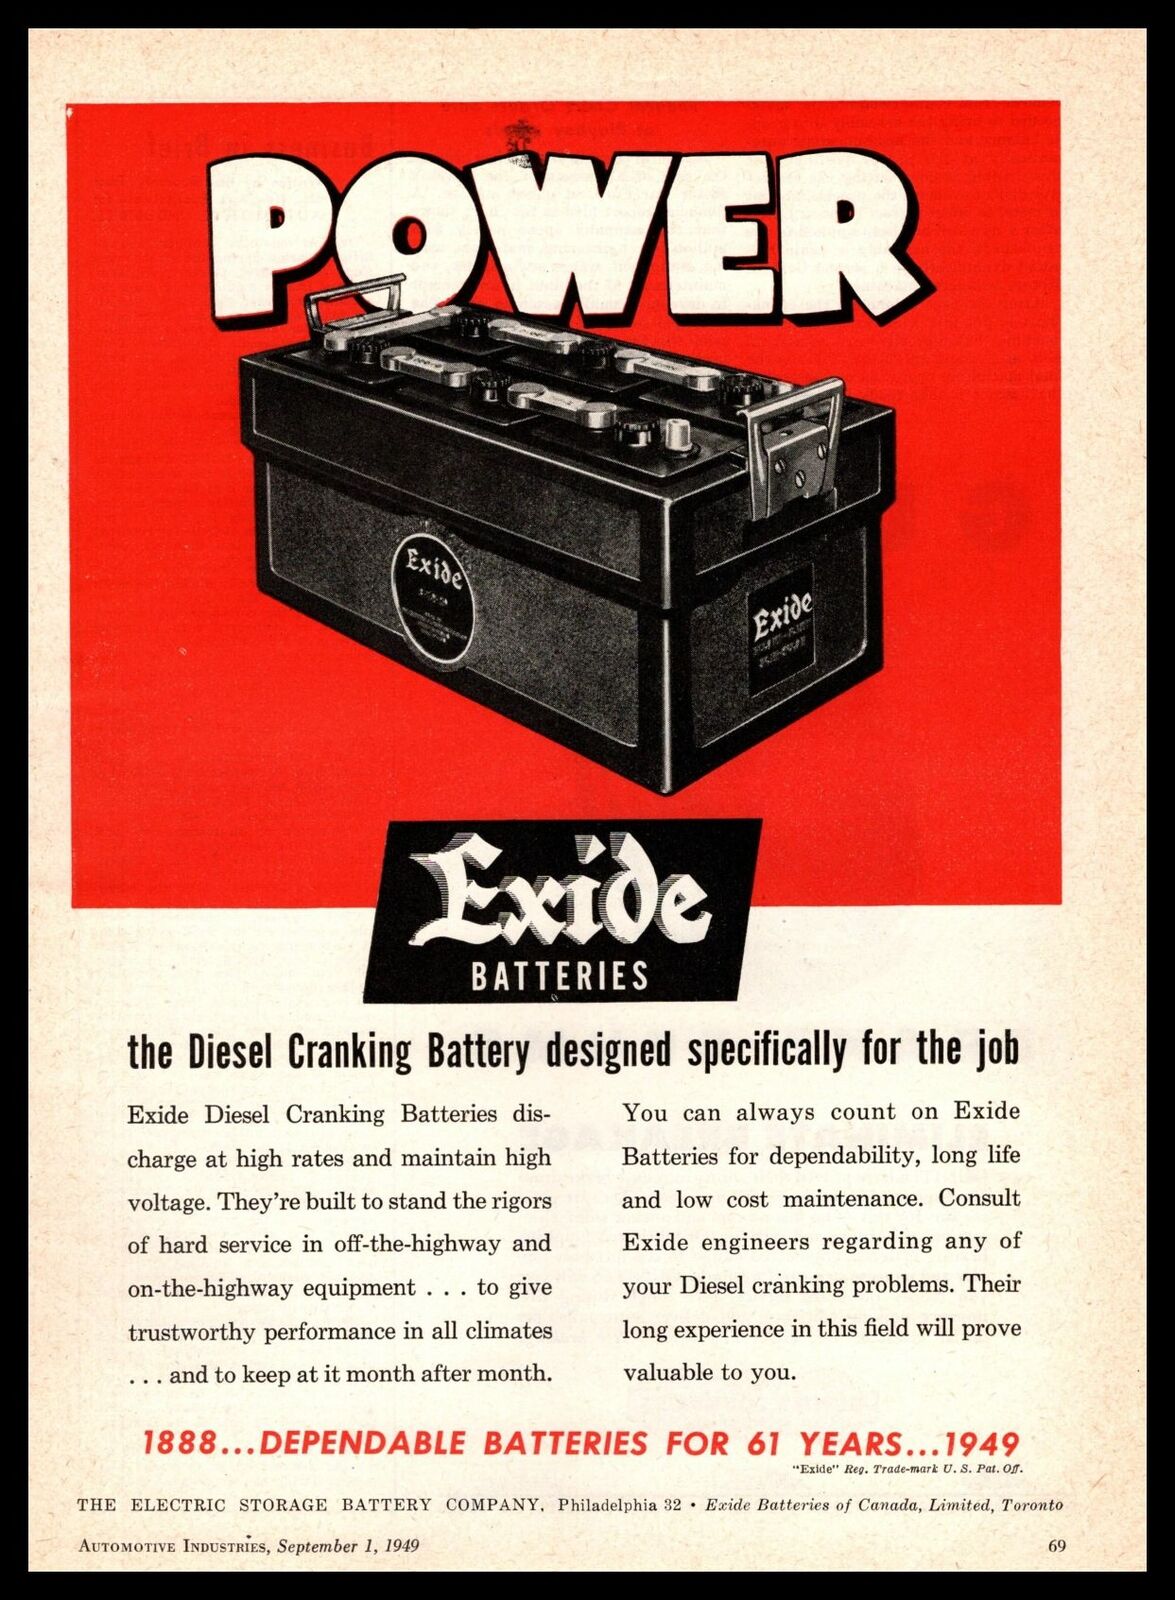 1949 Electric Storage Battery Company Exide Diesel Cranking Batteries Print Ad